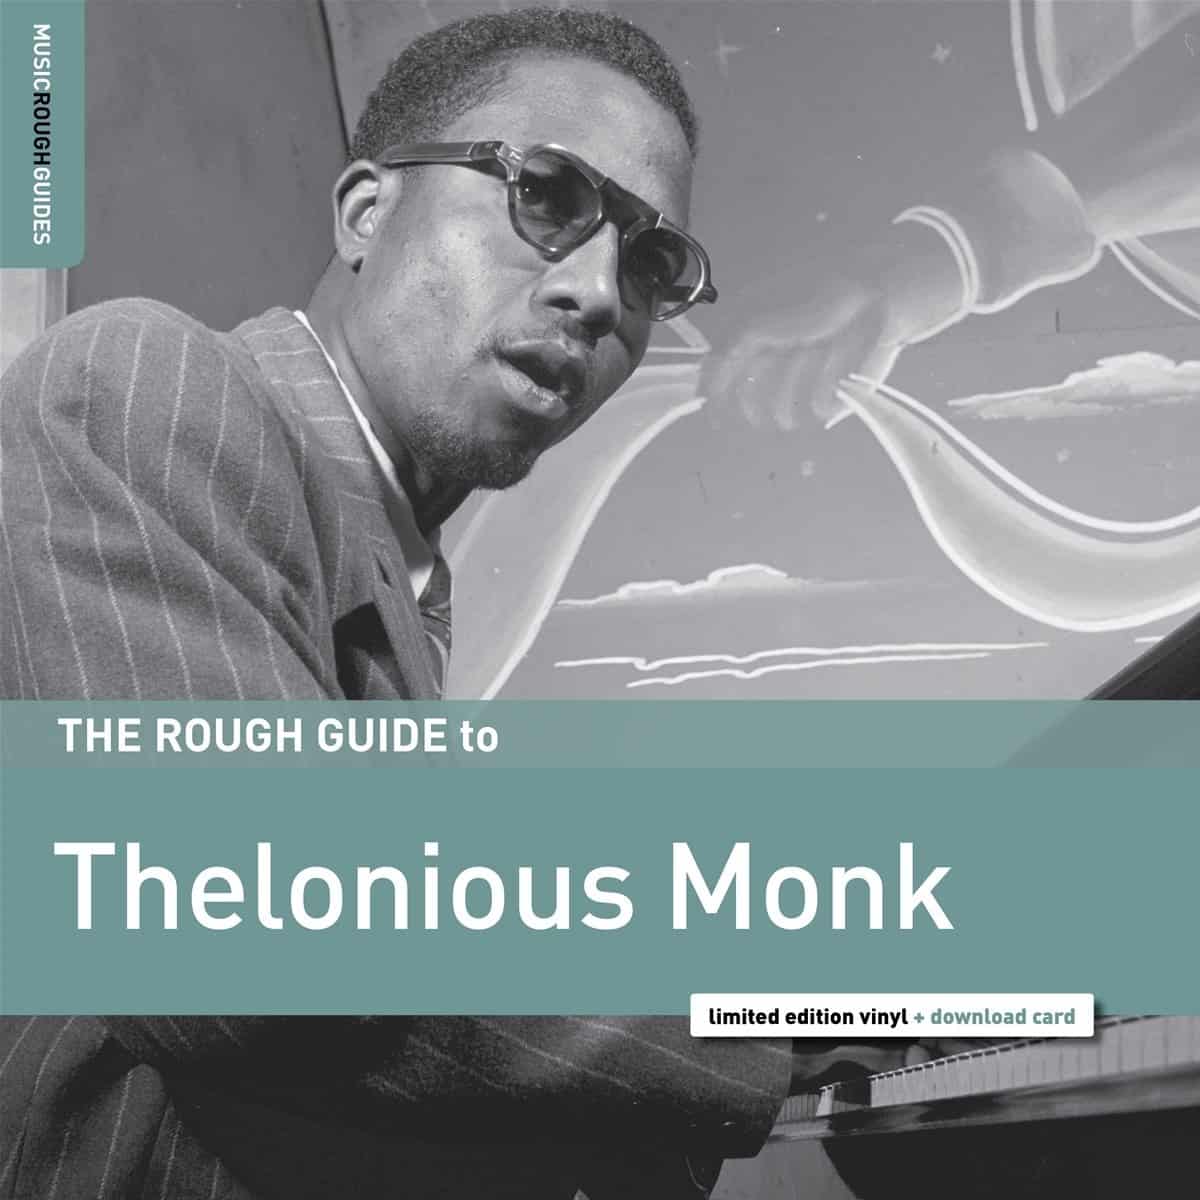 Thelonious-Monk-The-Rough-Guide-vinyl-record-album-front